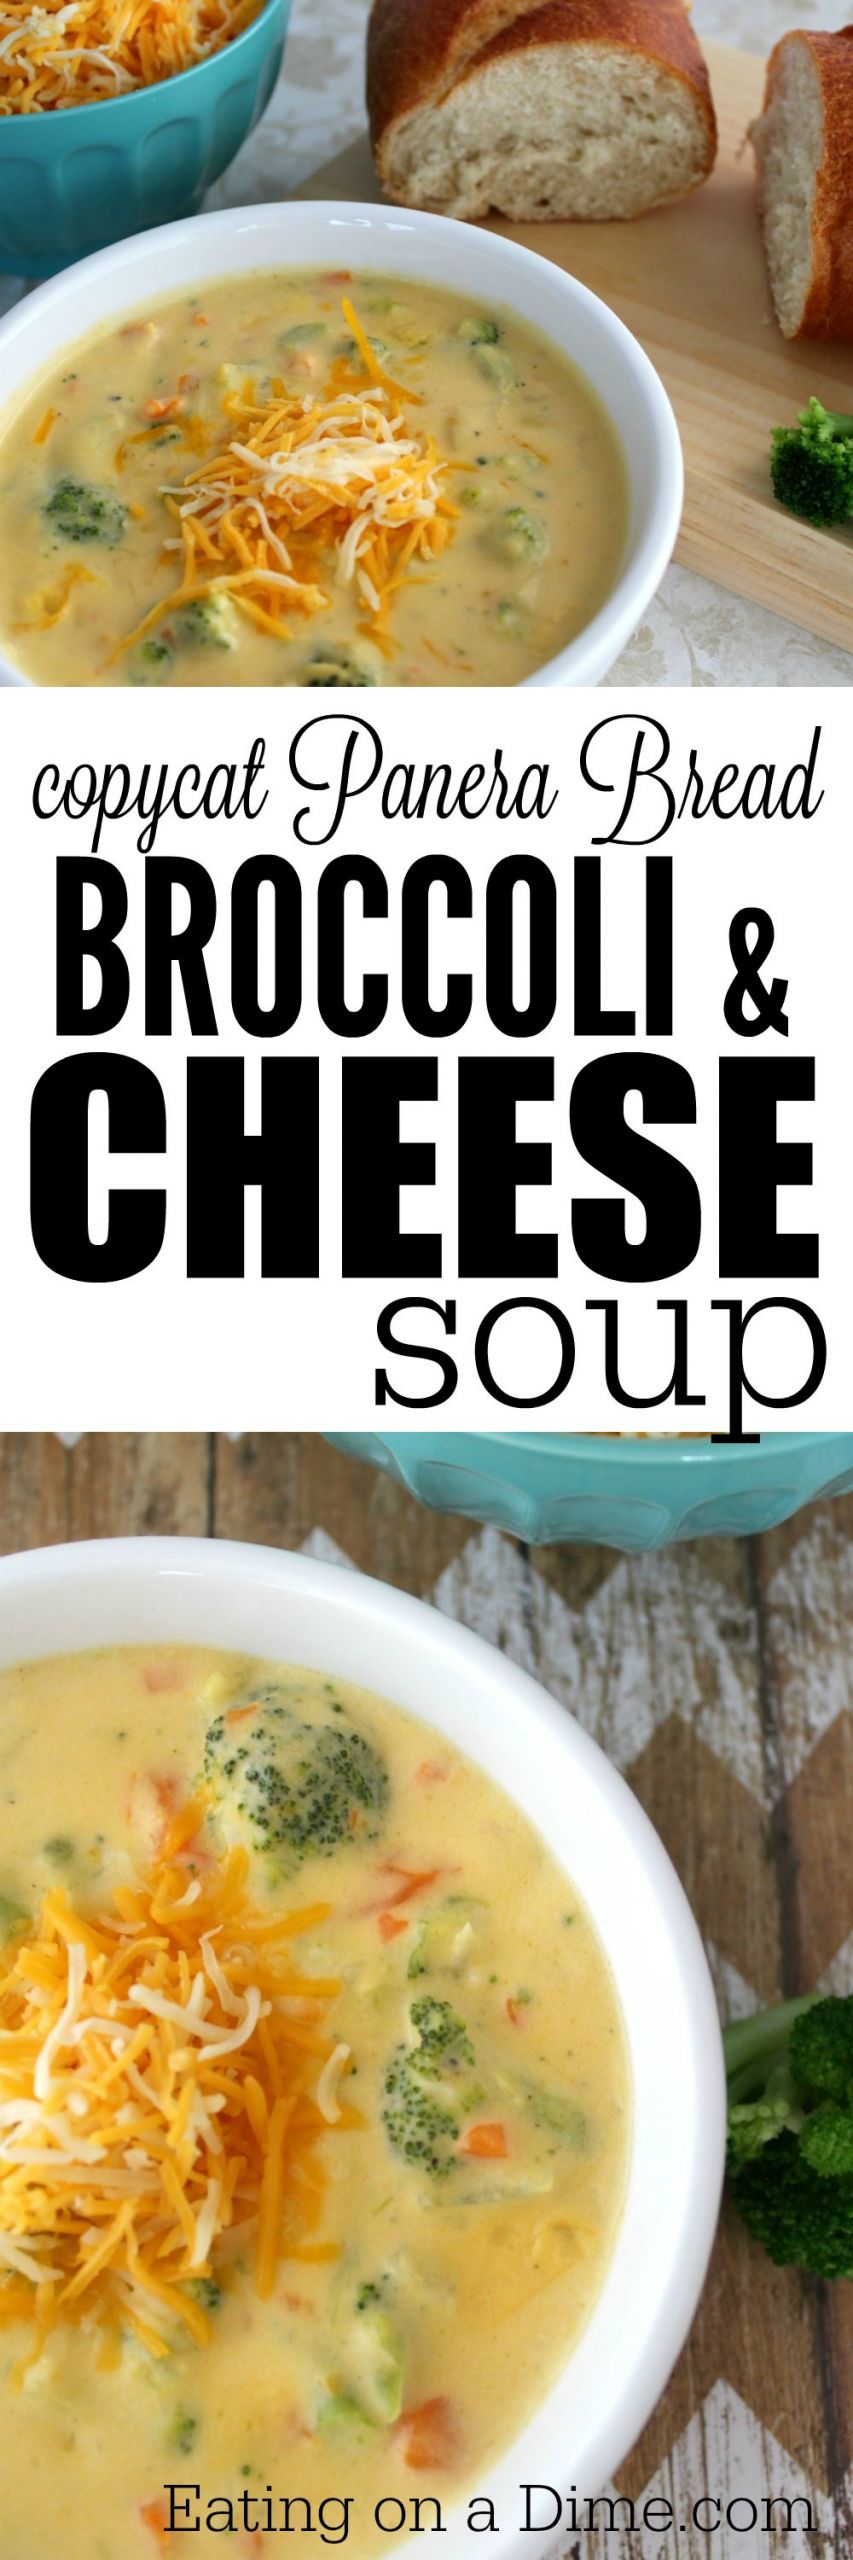 Broccoli Cheddar Soup Panera
 CopyCat Panera recipe Broccoli and Cheese Soup Eating on